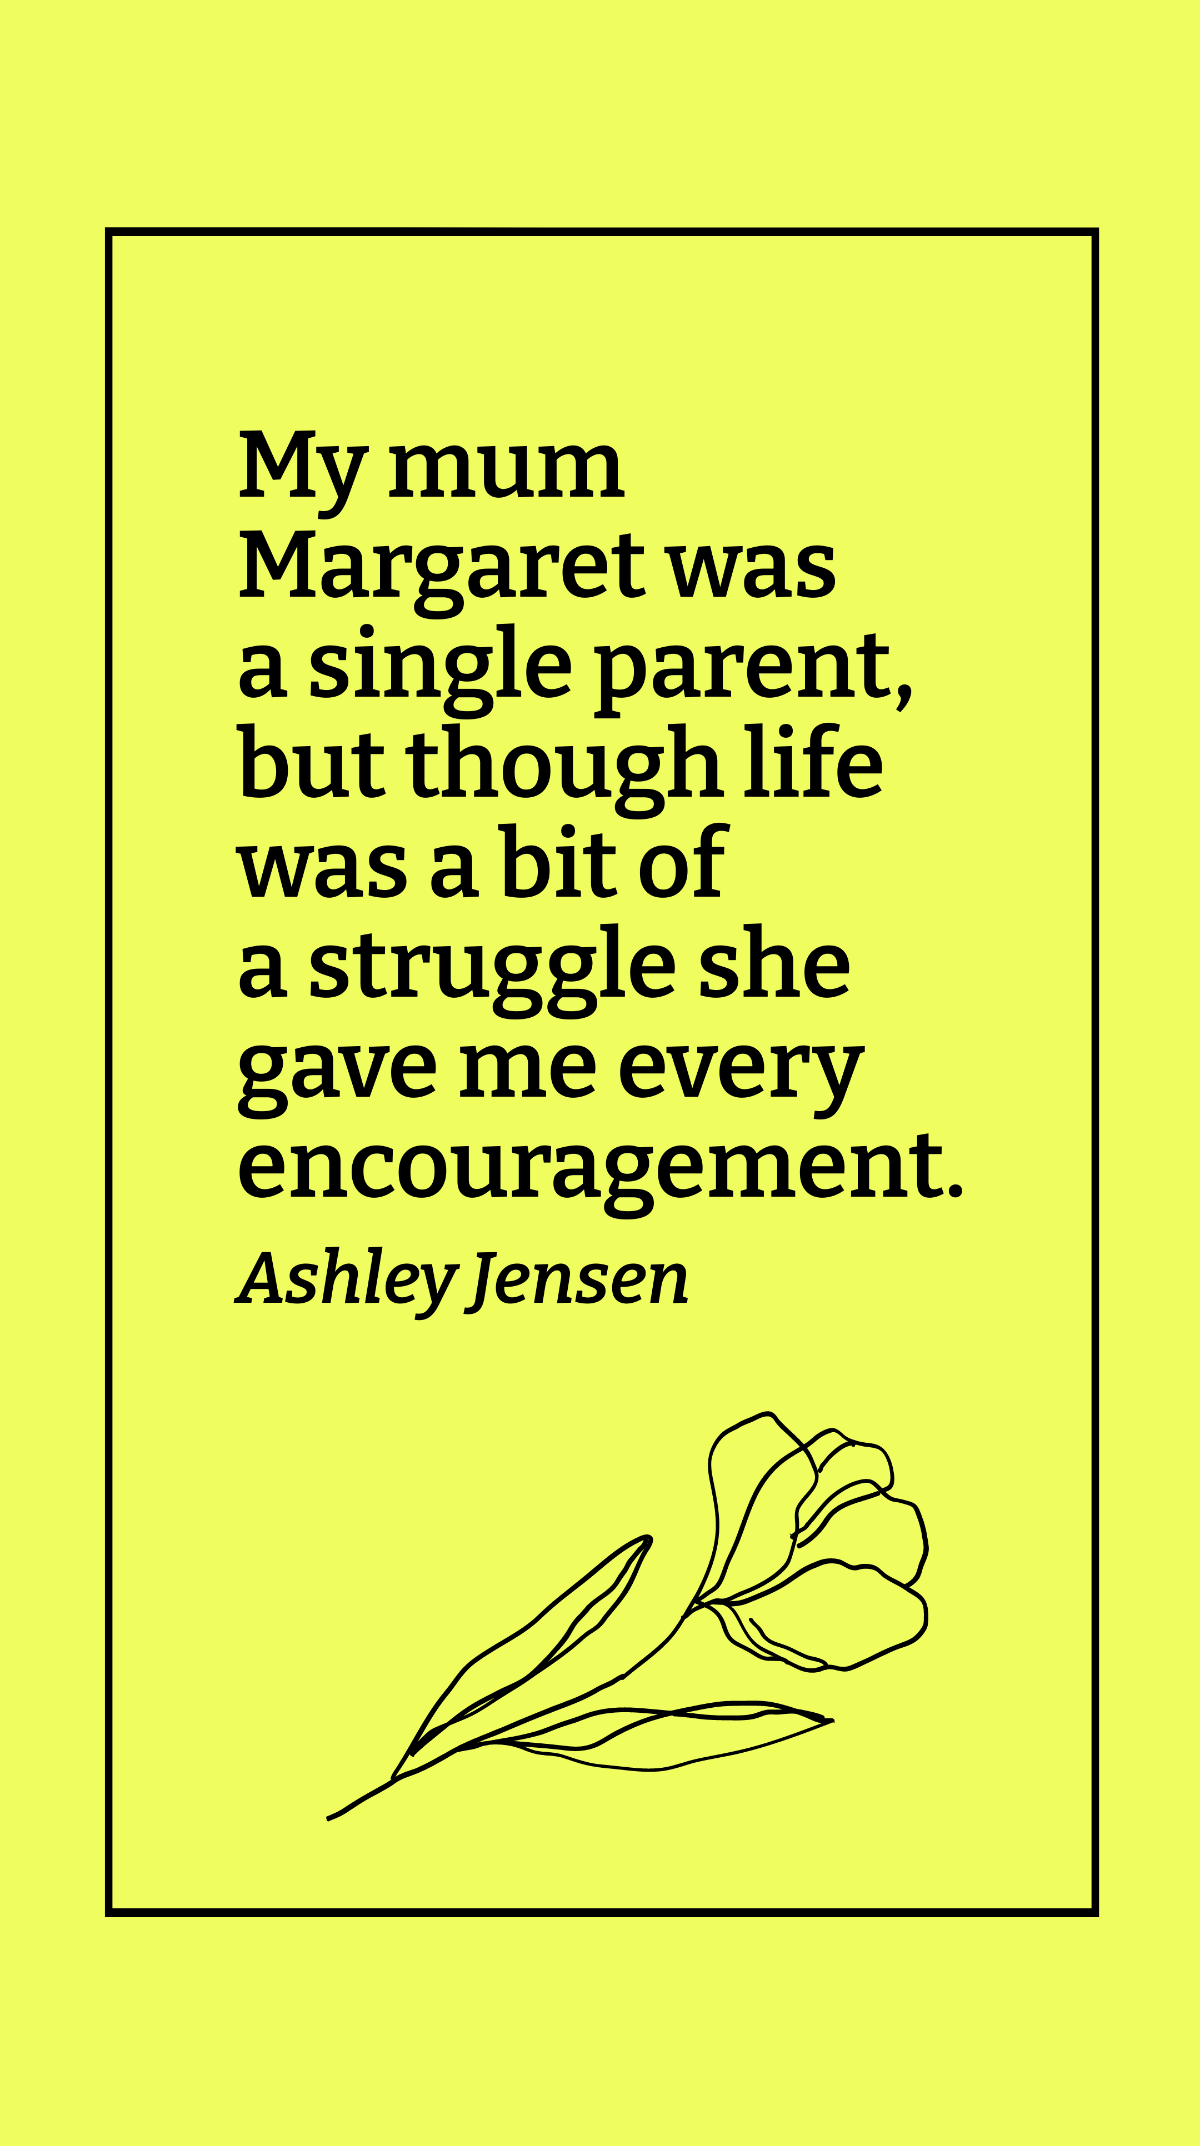 Free Ashley Jensen - My mum Margaret was a single parent, but though life was a bit of a struggle she gave me every encouragement. Template